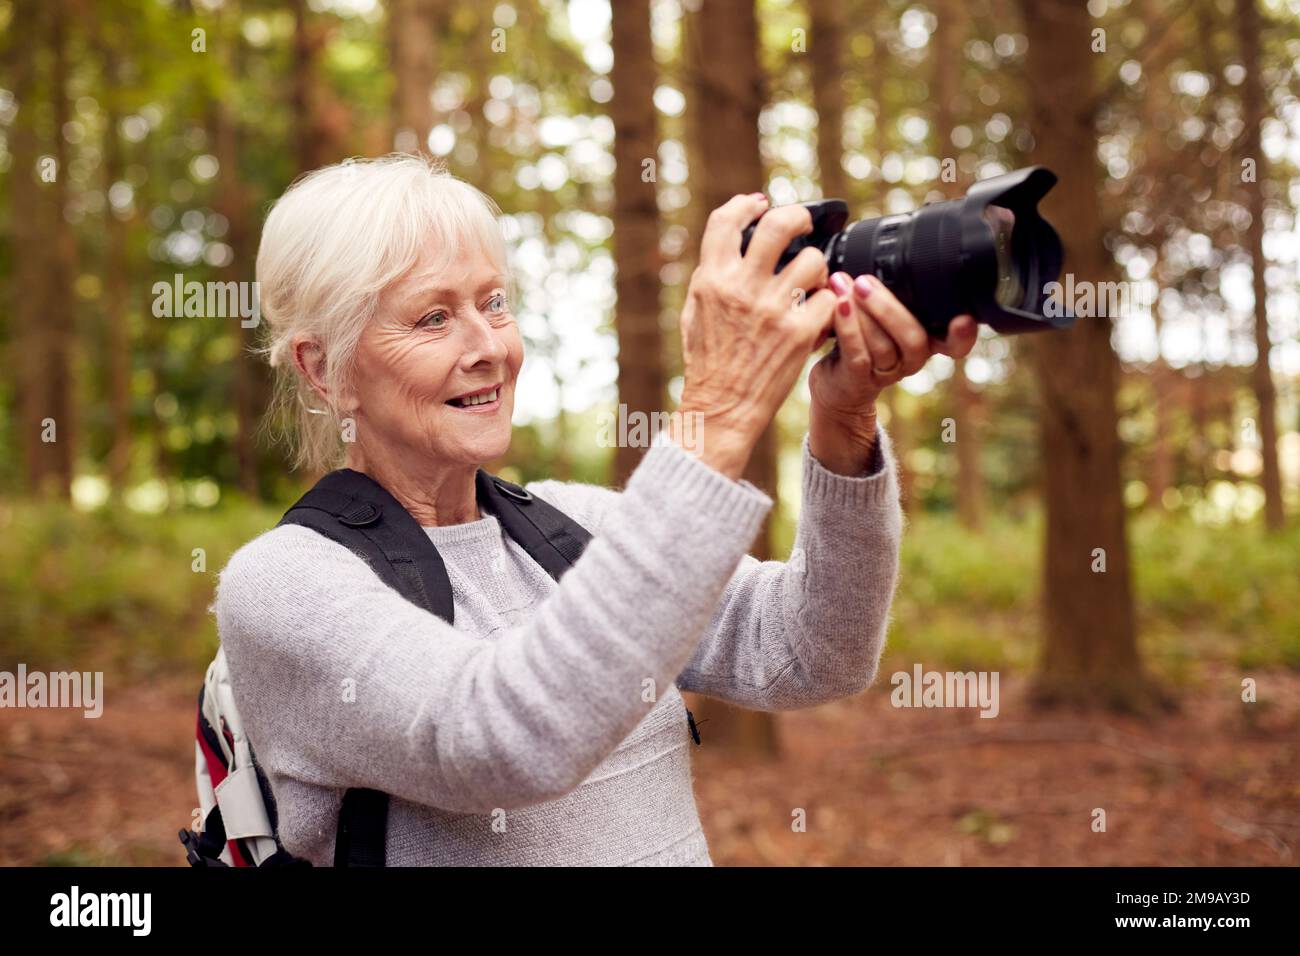 Retired Senior Woman Hiking In Woodland Countryside Taking Photo With DSLR Camera Stock Photo